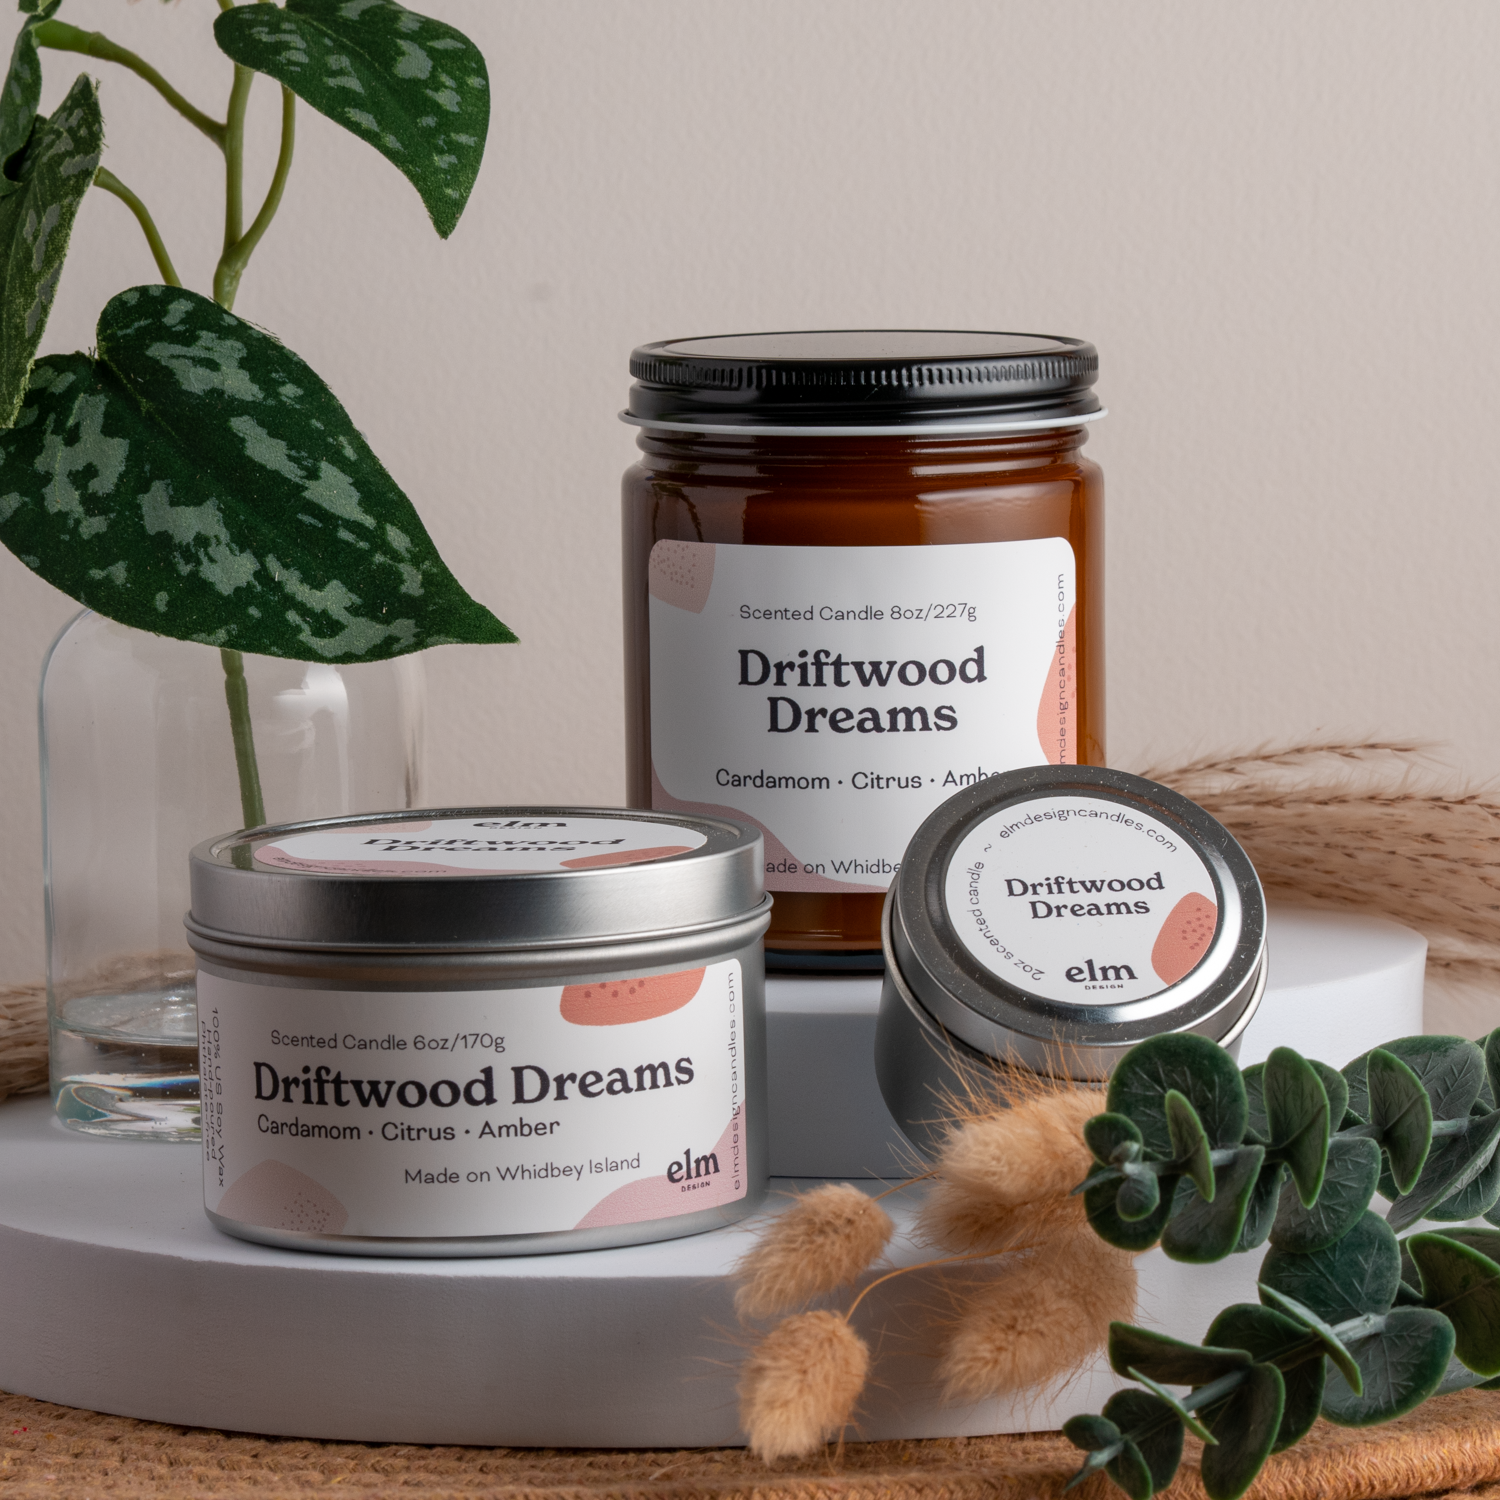 Driftwood Dreams scented soy candles in colorfully labeled 8, 6 and 2 oz containers.